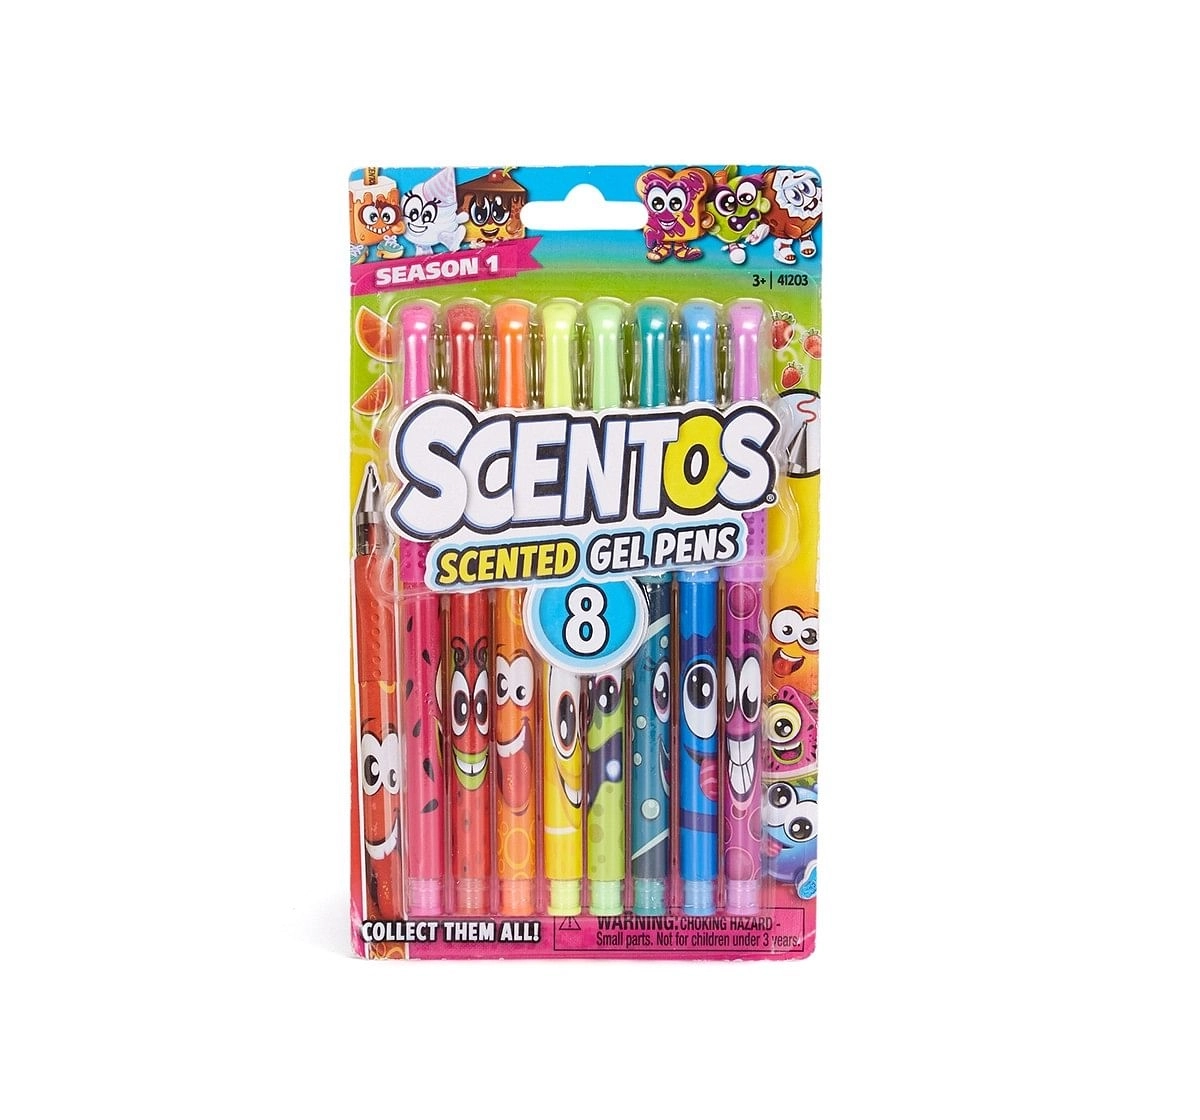 Scentos Scented Gel Pens - Pack of 8 School Stationery for Kids age 3Y+ 